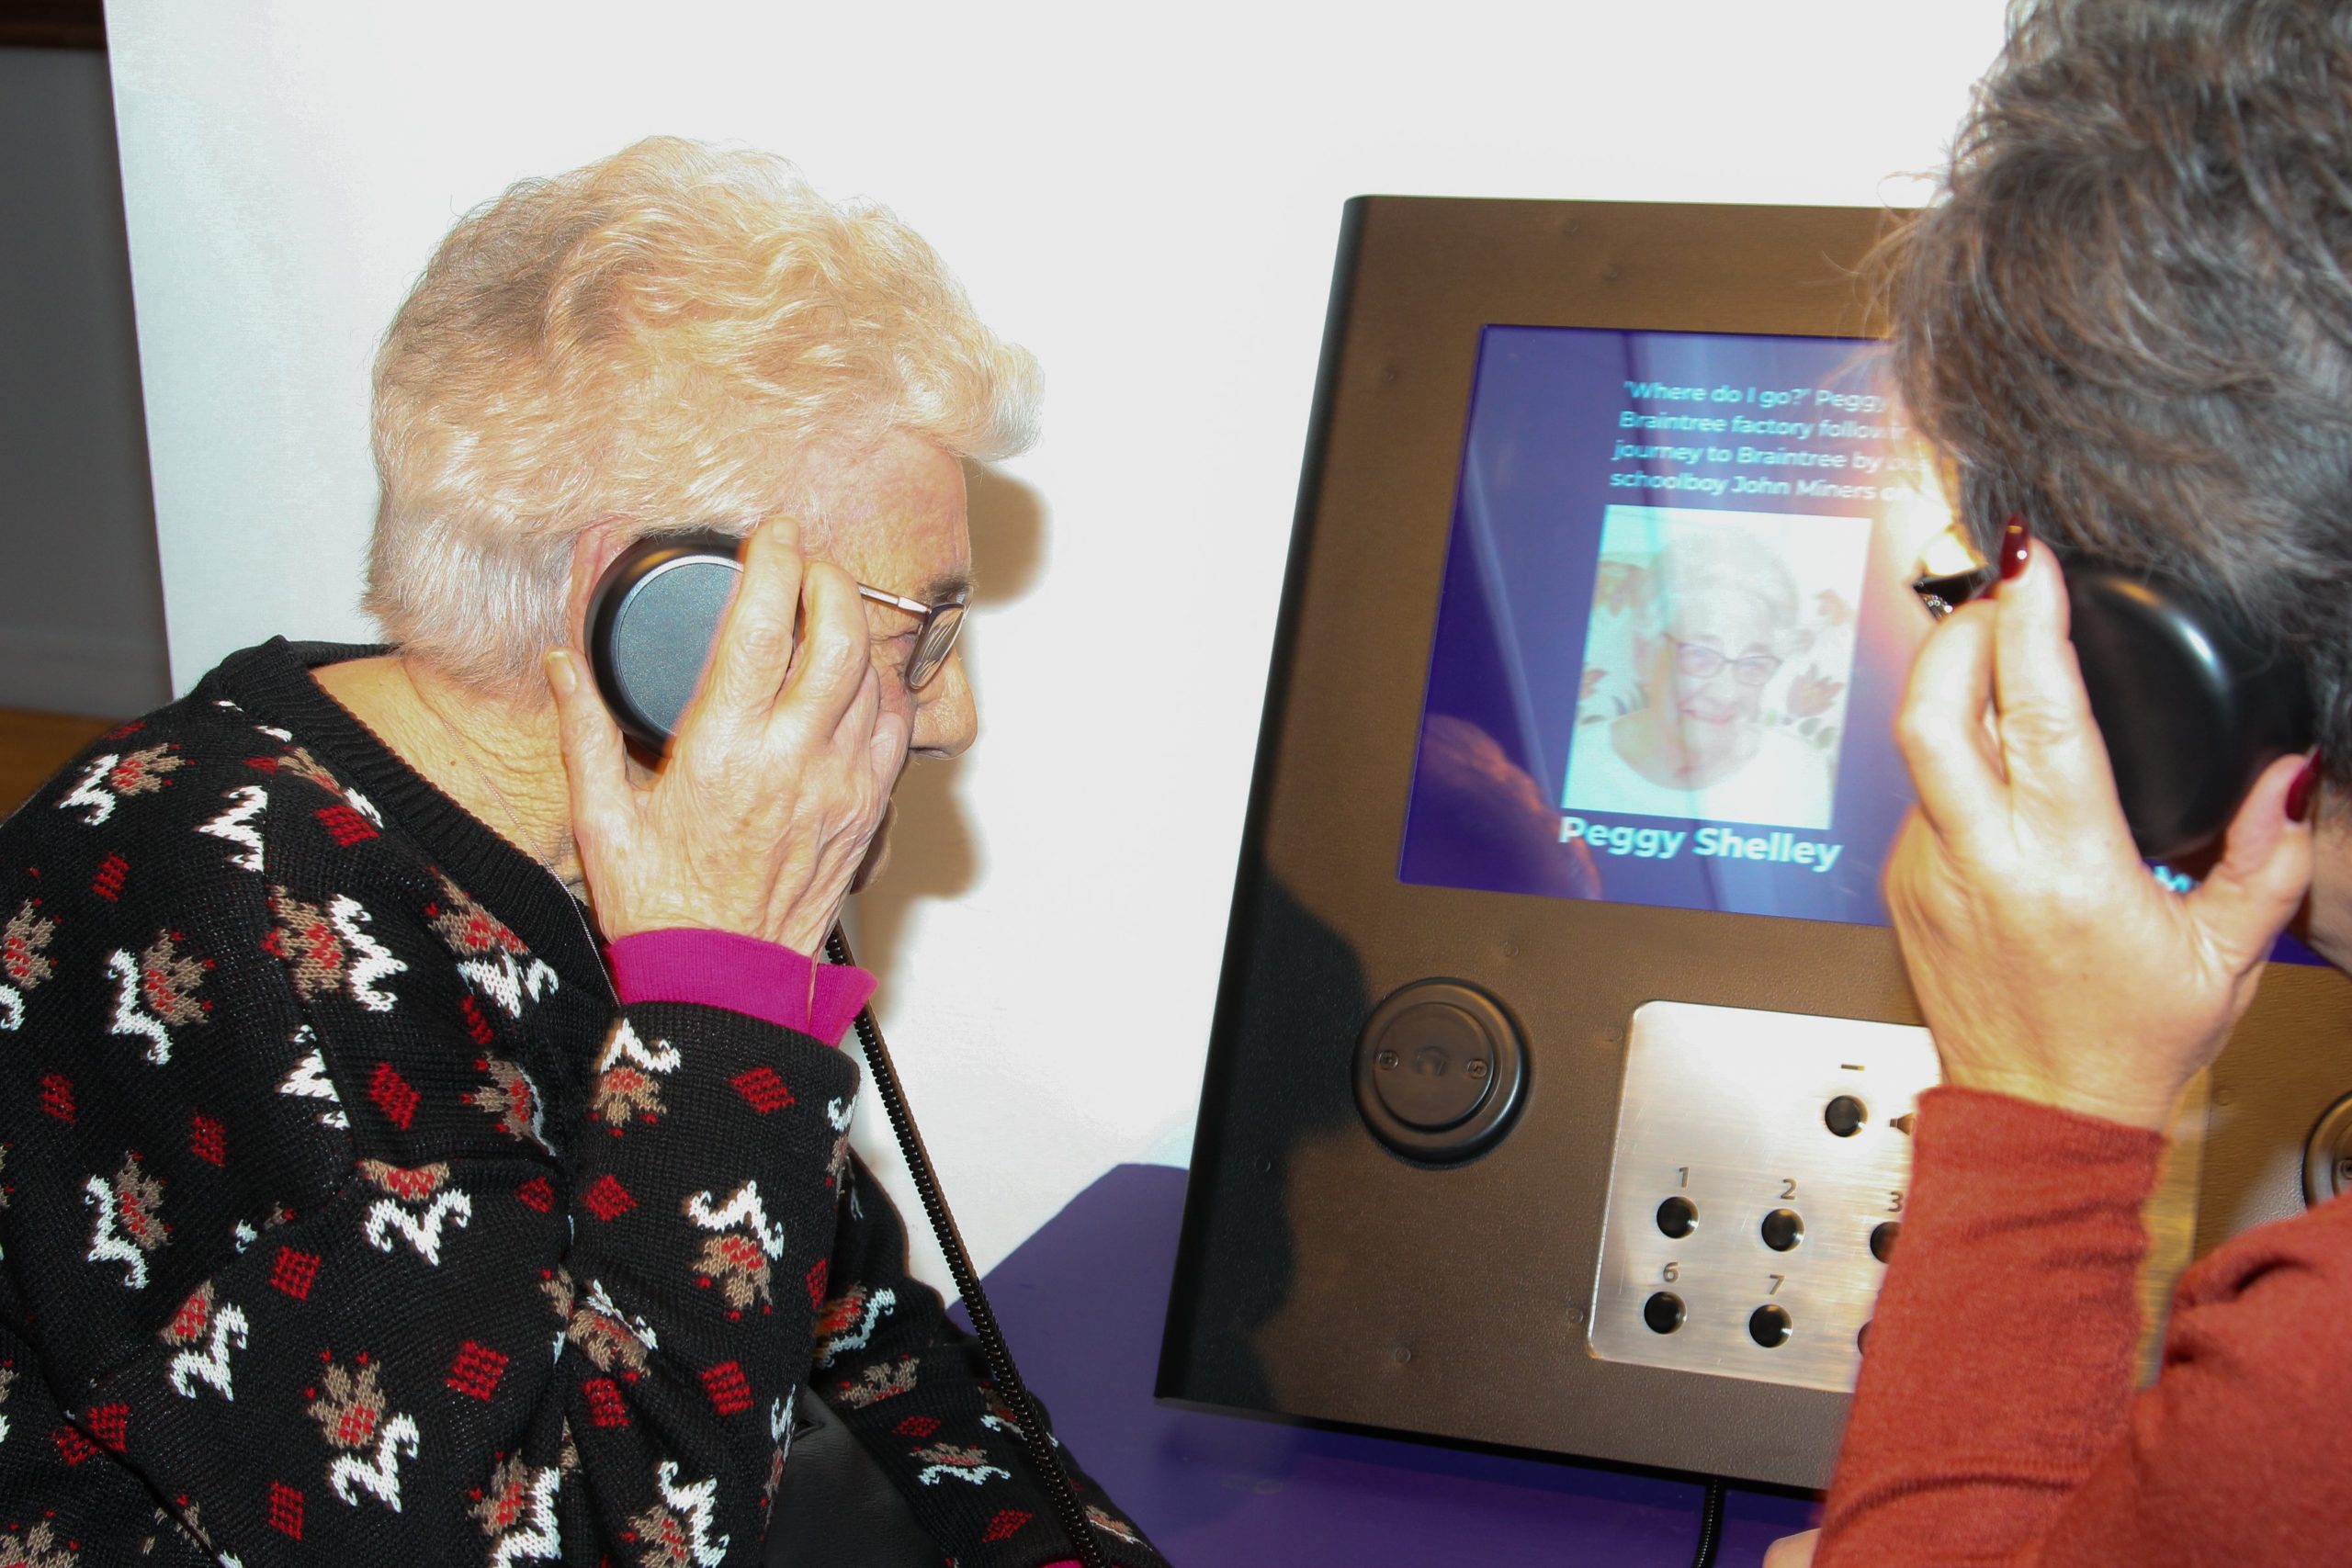 A former Courtaulds employee listens to an audio display